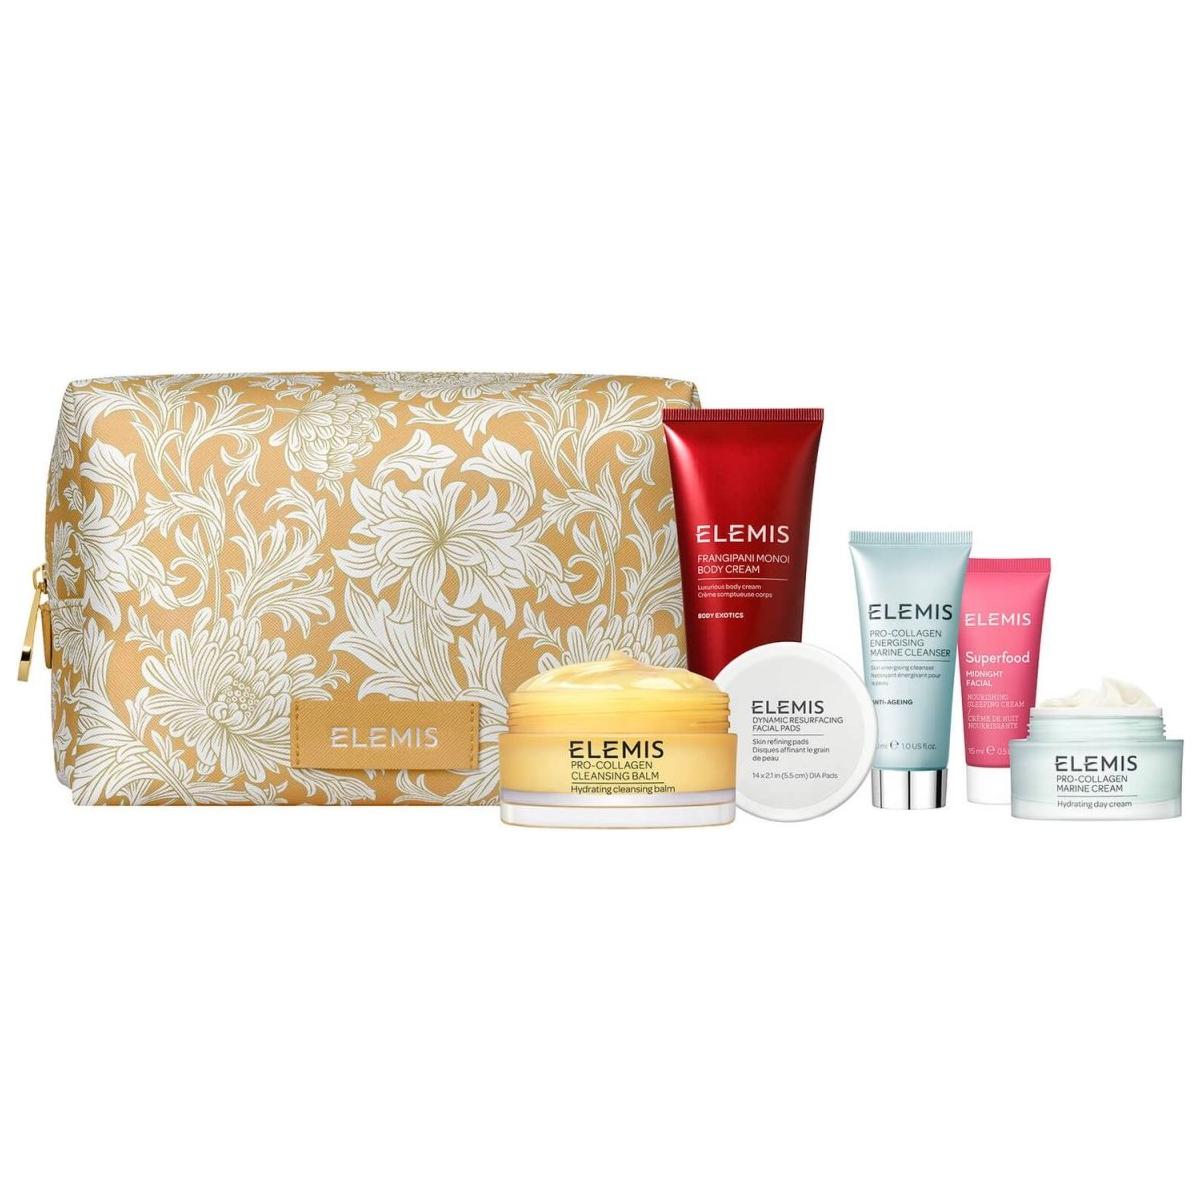 Elemis Gifts & Sets The Iconic Collection - DG International Ventures Limited